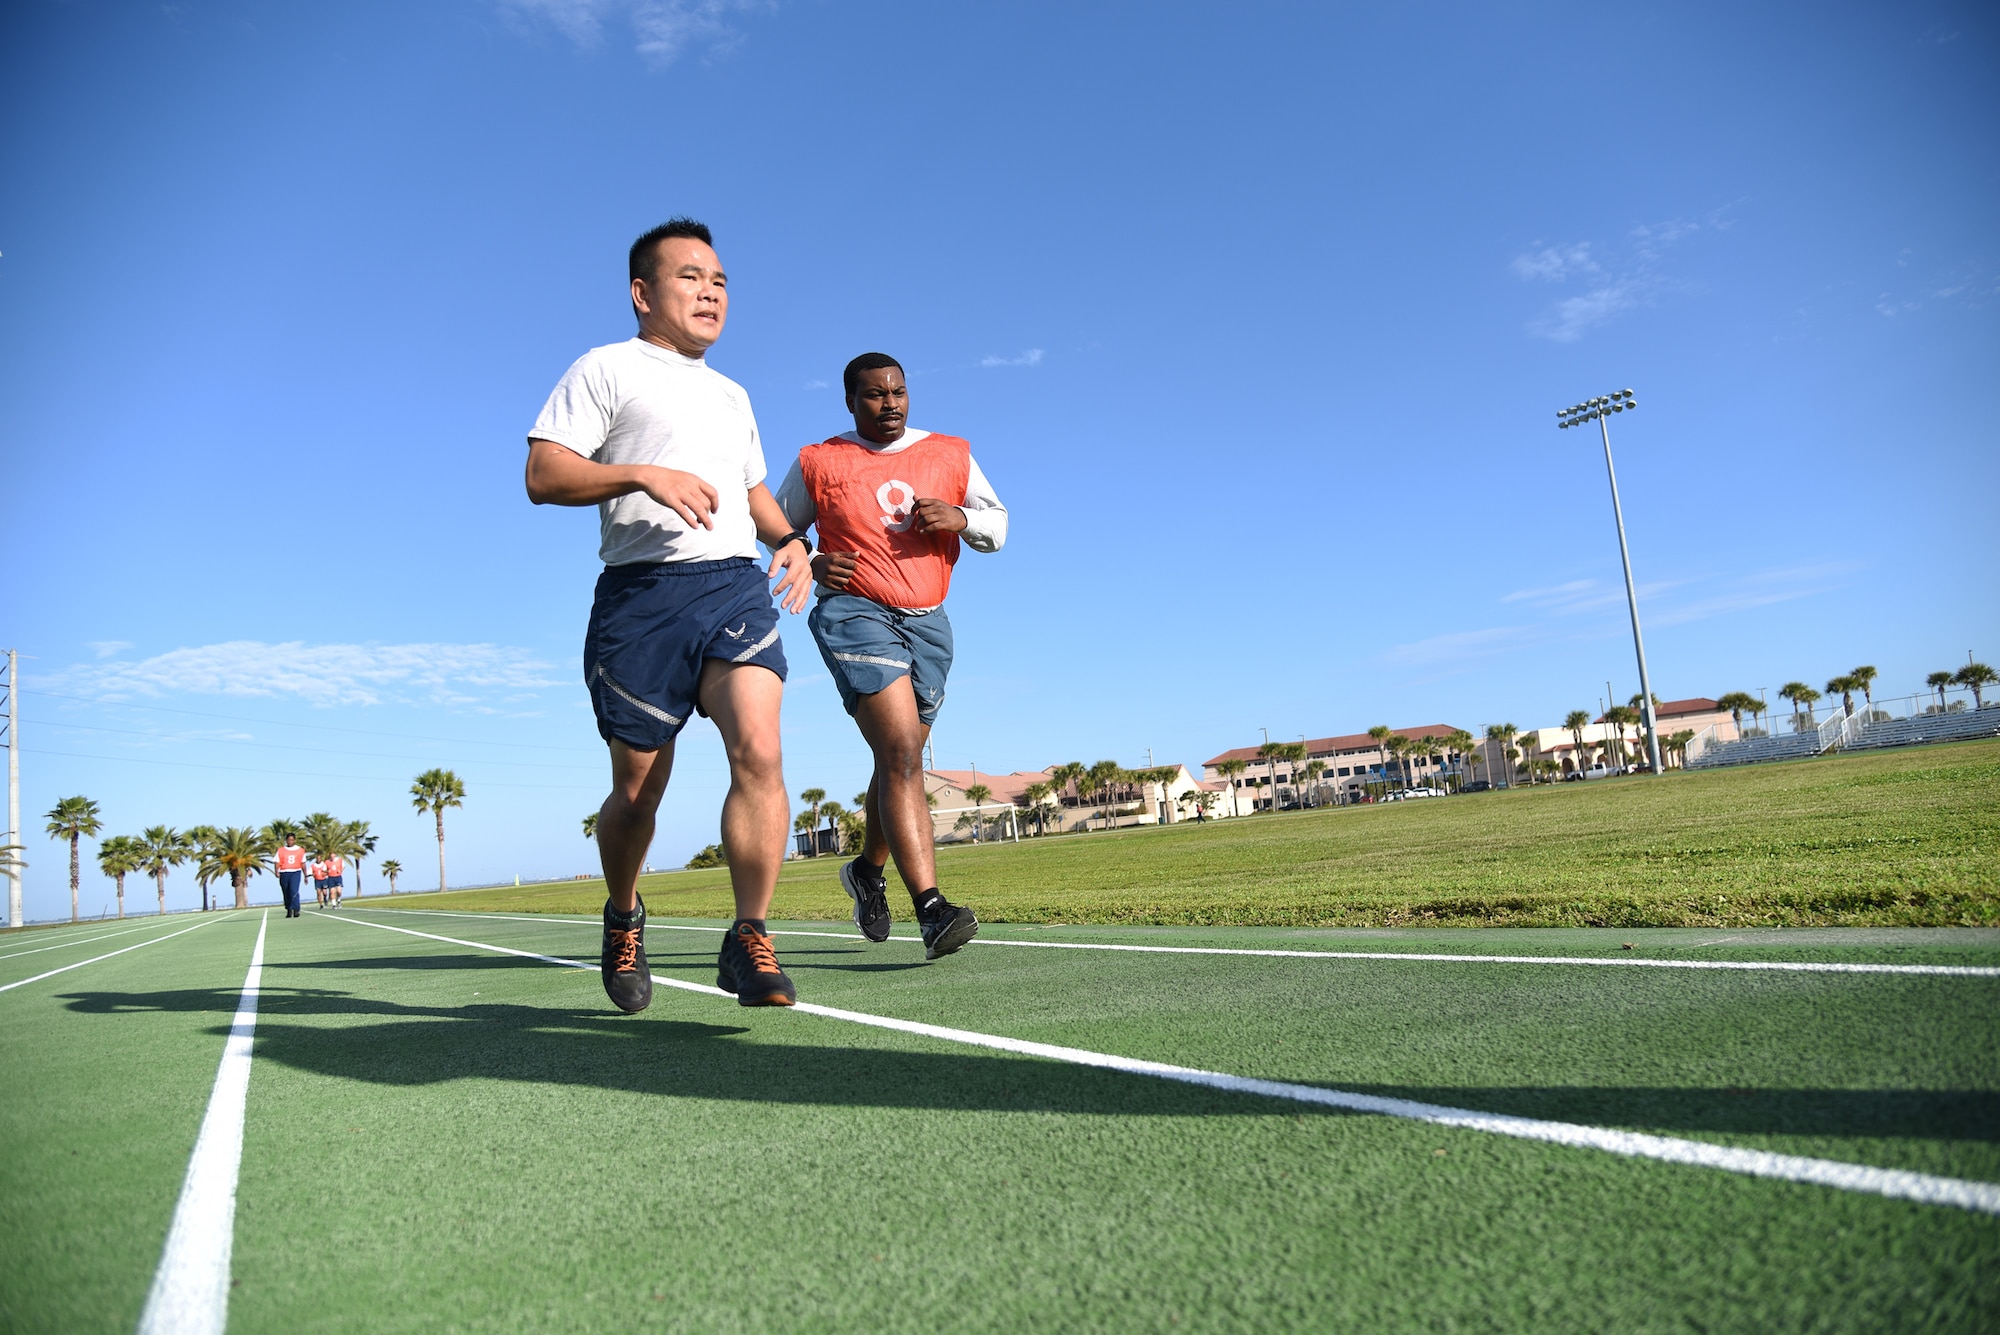 Lt. Col. Asan Bui runs alongside Senior Airman Kevin Frazier to cheer him on during a physical training test at Patrick Air Force Base, Florida, on Jan. 13, 2019. Both men are a part of the 920th Rescue Wing’s Communications Flight, with Bui serving as the commander. Frazier expressed his gratitude and said the support helped him beat his previous record.  (U.S. Air Force photo by Senior Airman Brandon Kalloo Sanes)